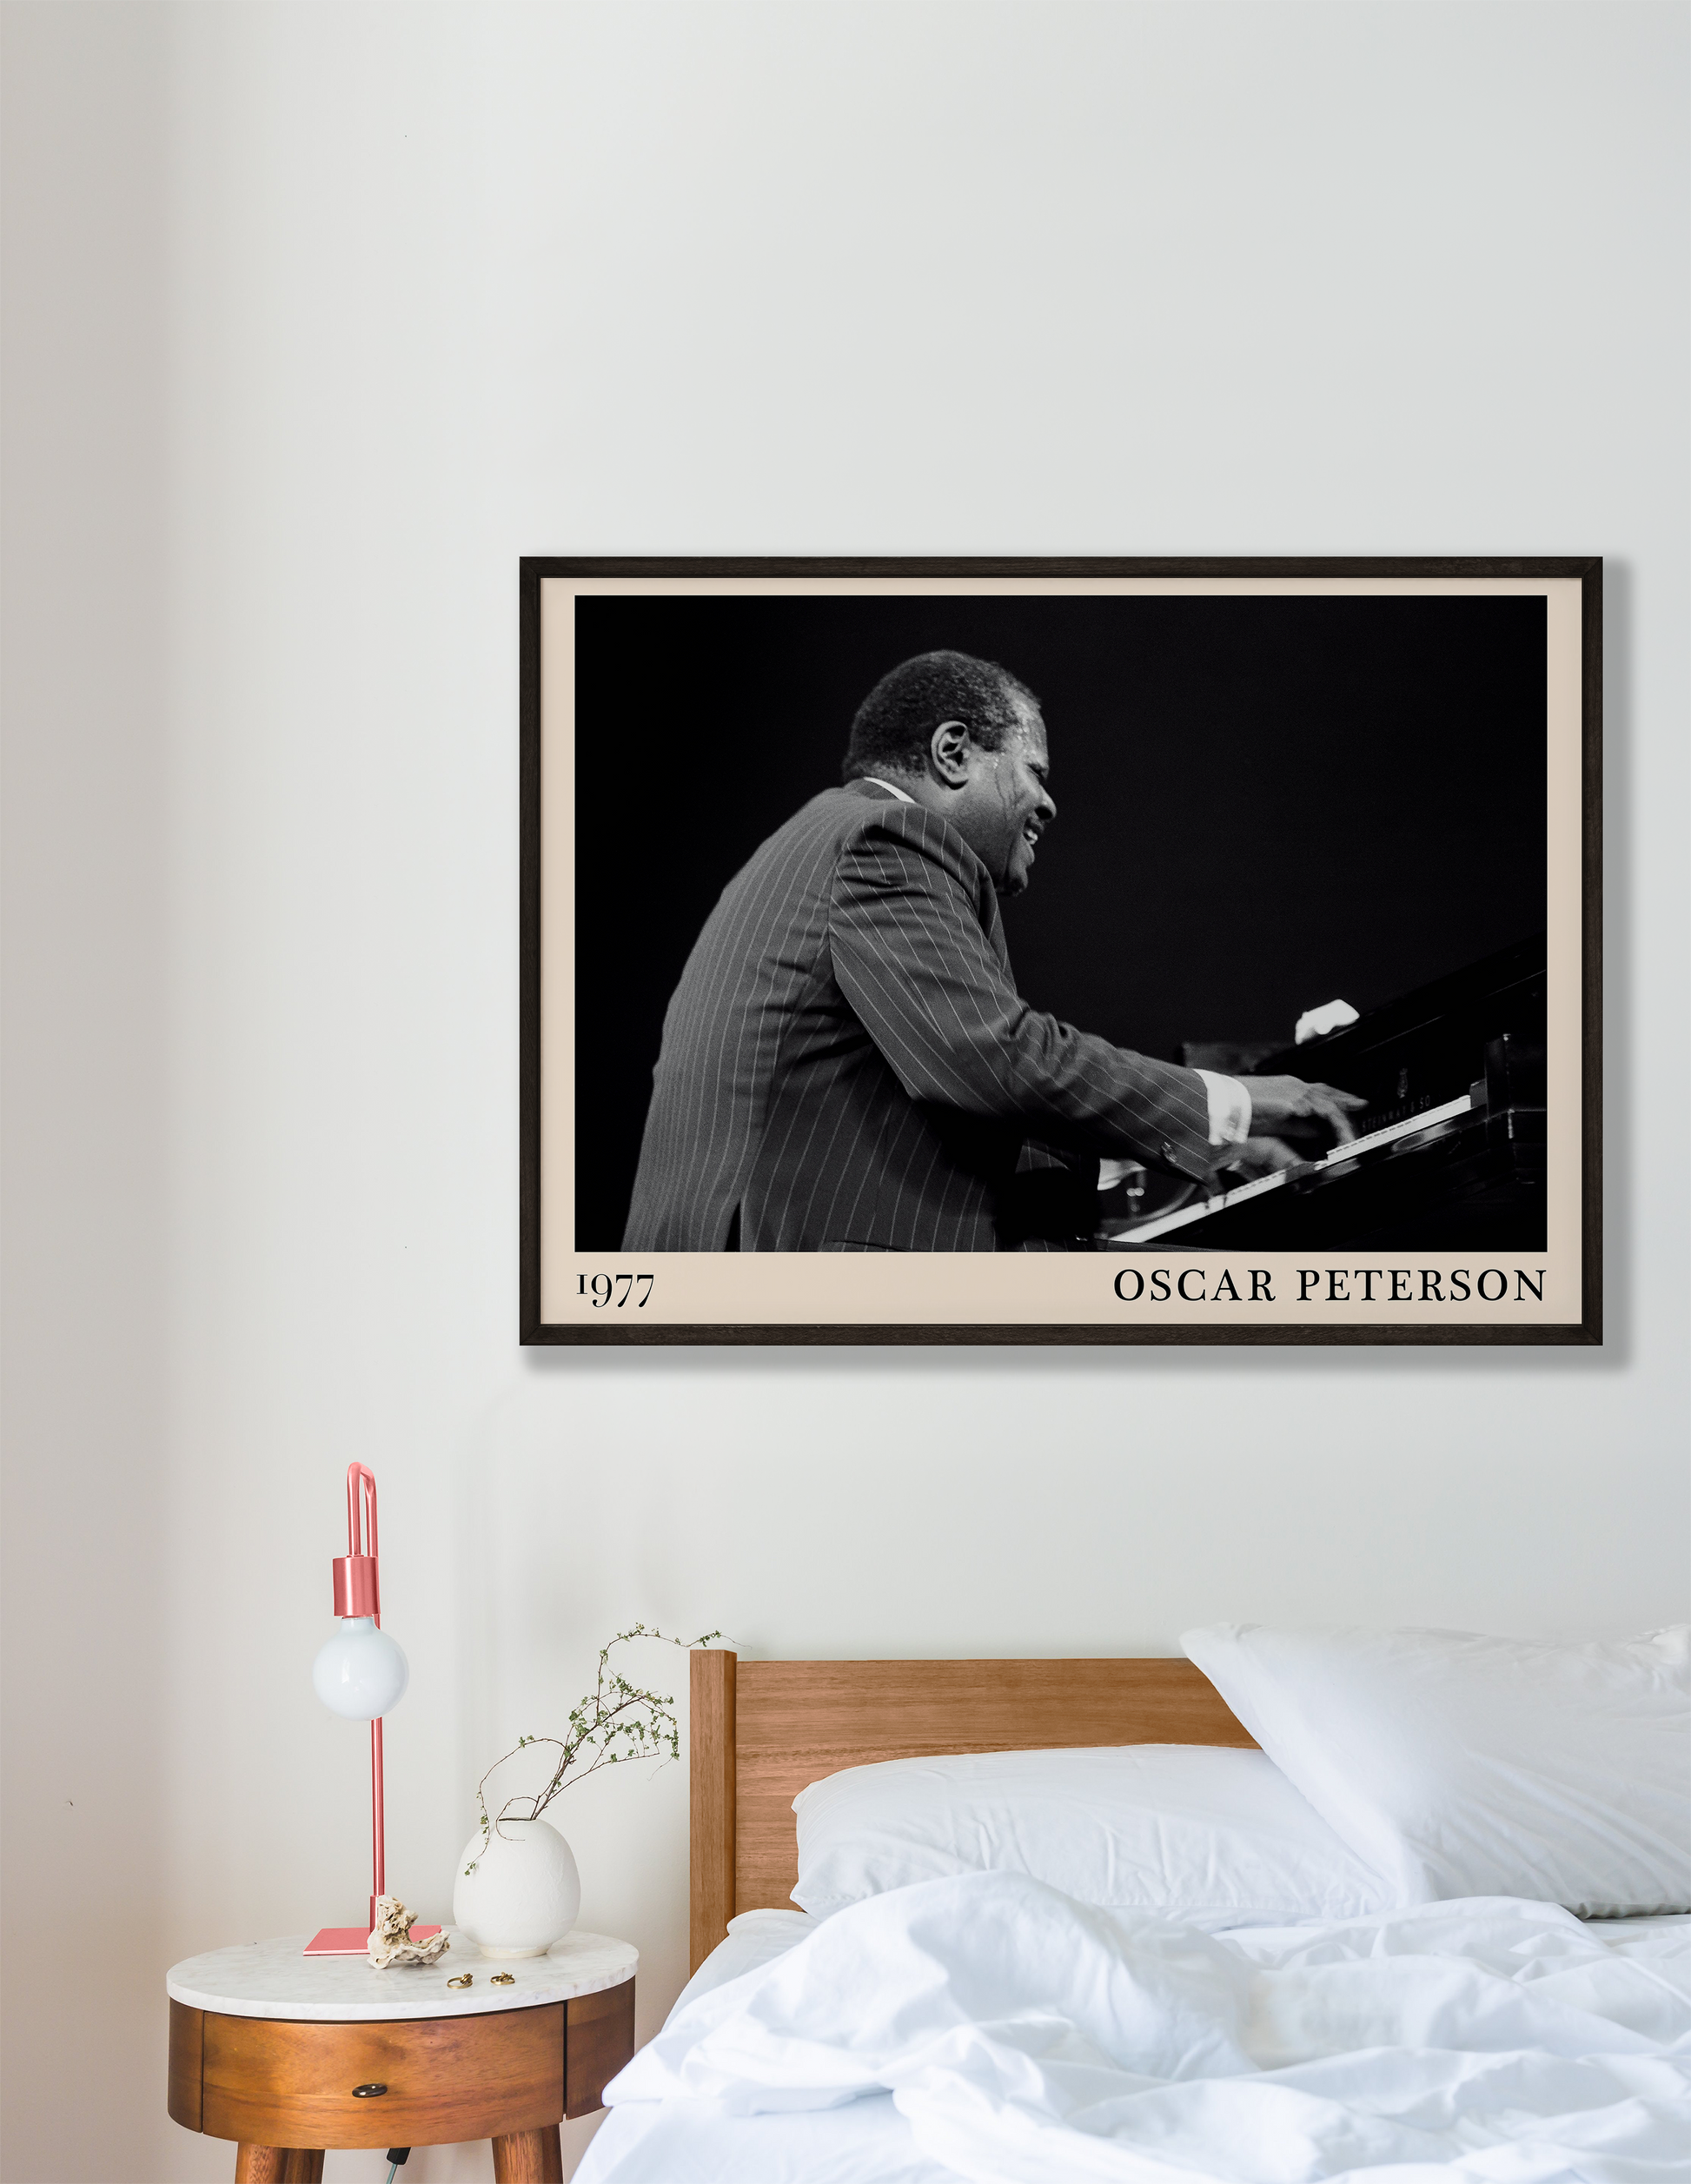 1977 photograph of Oscar Peterson taken by Thomas Marcello. Picture crafted into a cool black framed jazz print, with an off-white border. Poster is hanging on a white bedroom wall